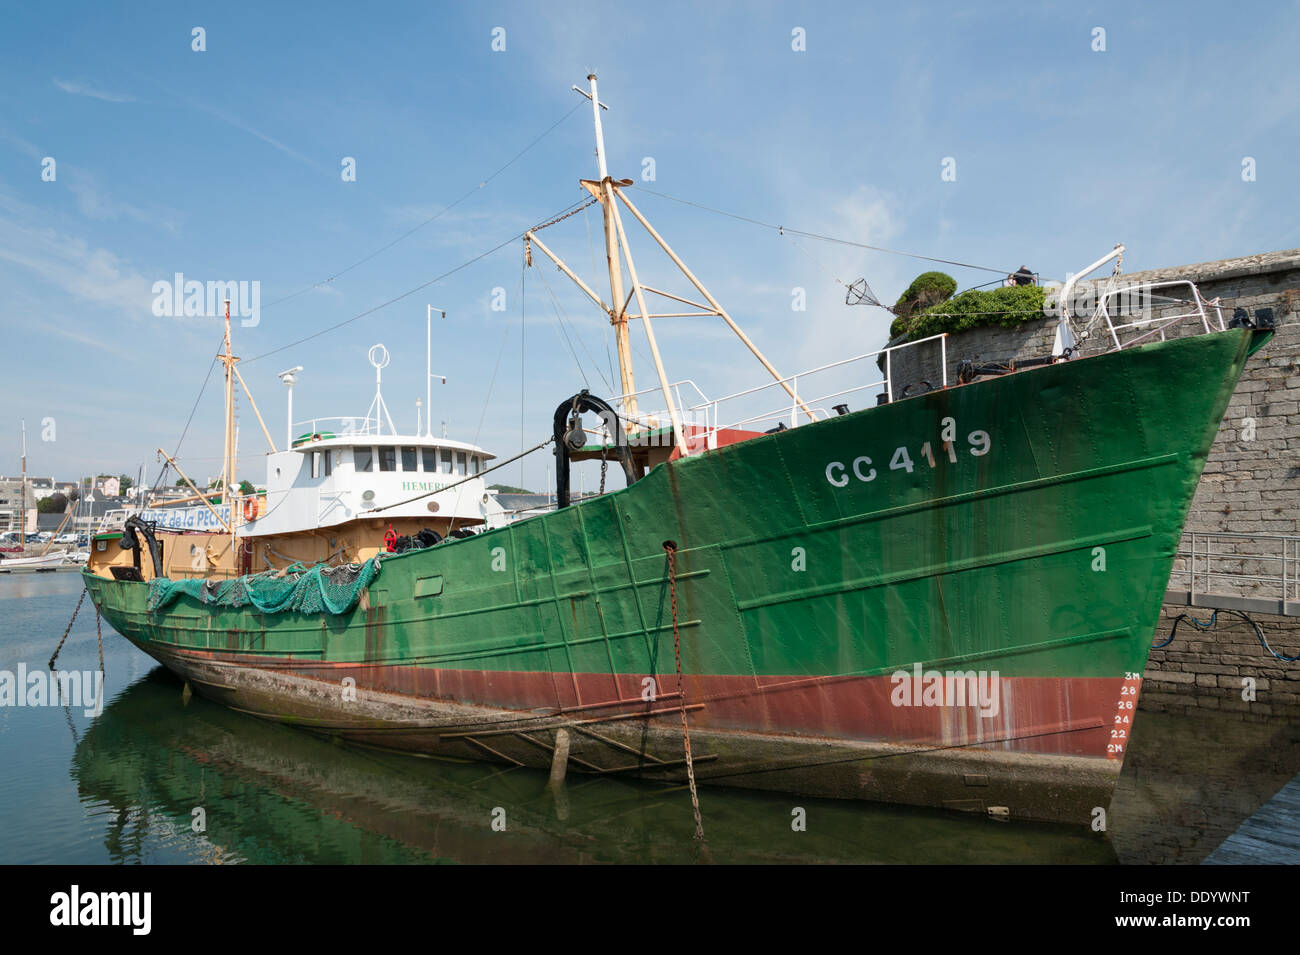 The Trawler Hemerica moored at the fishing museum at Concarneau Brittany France Stock Photo